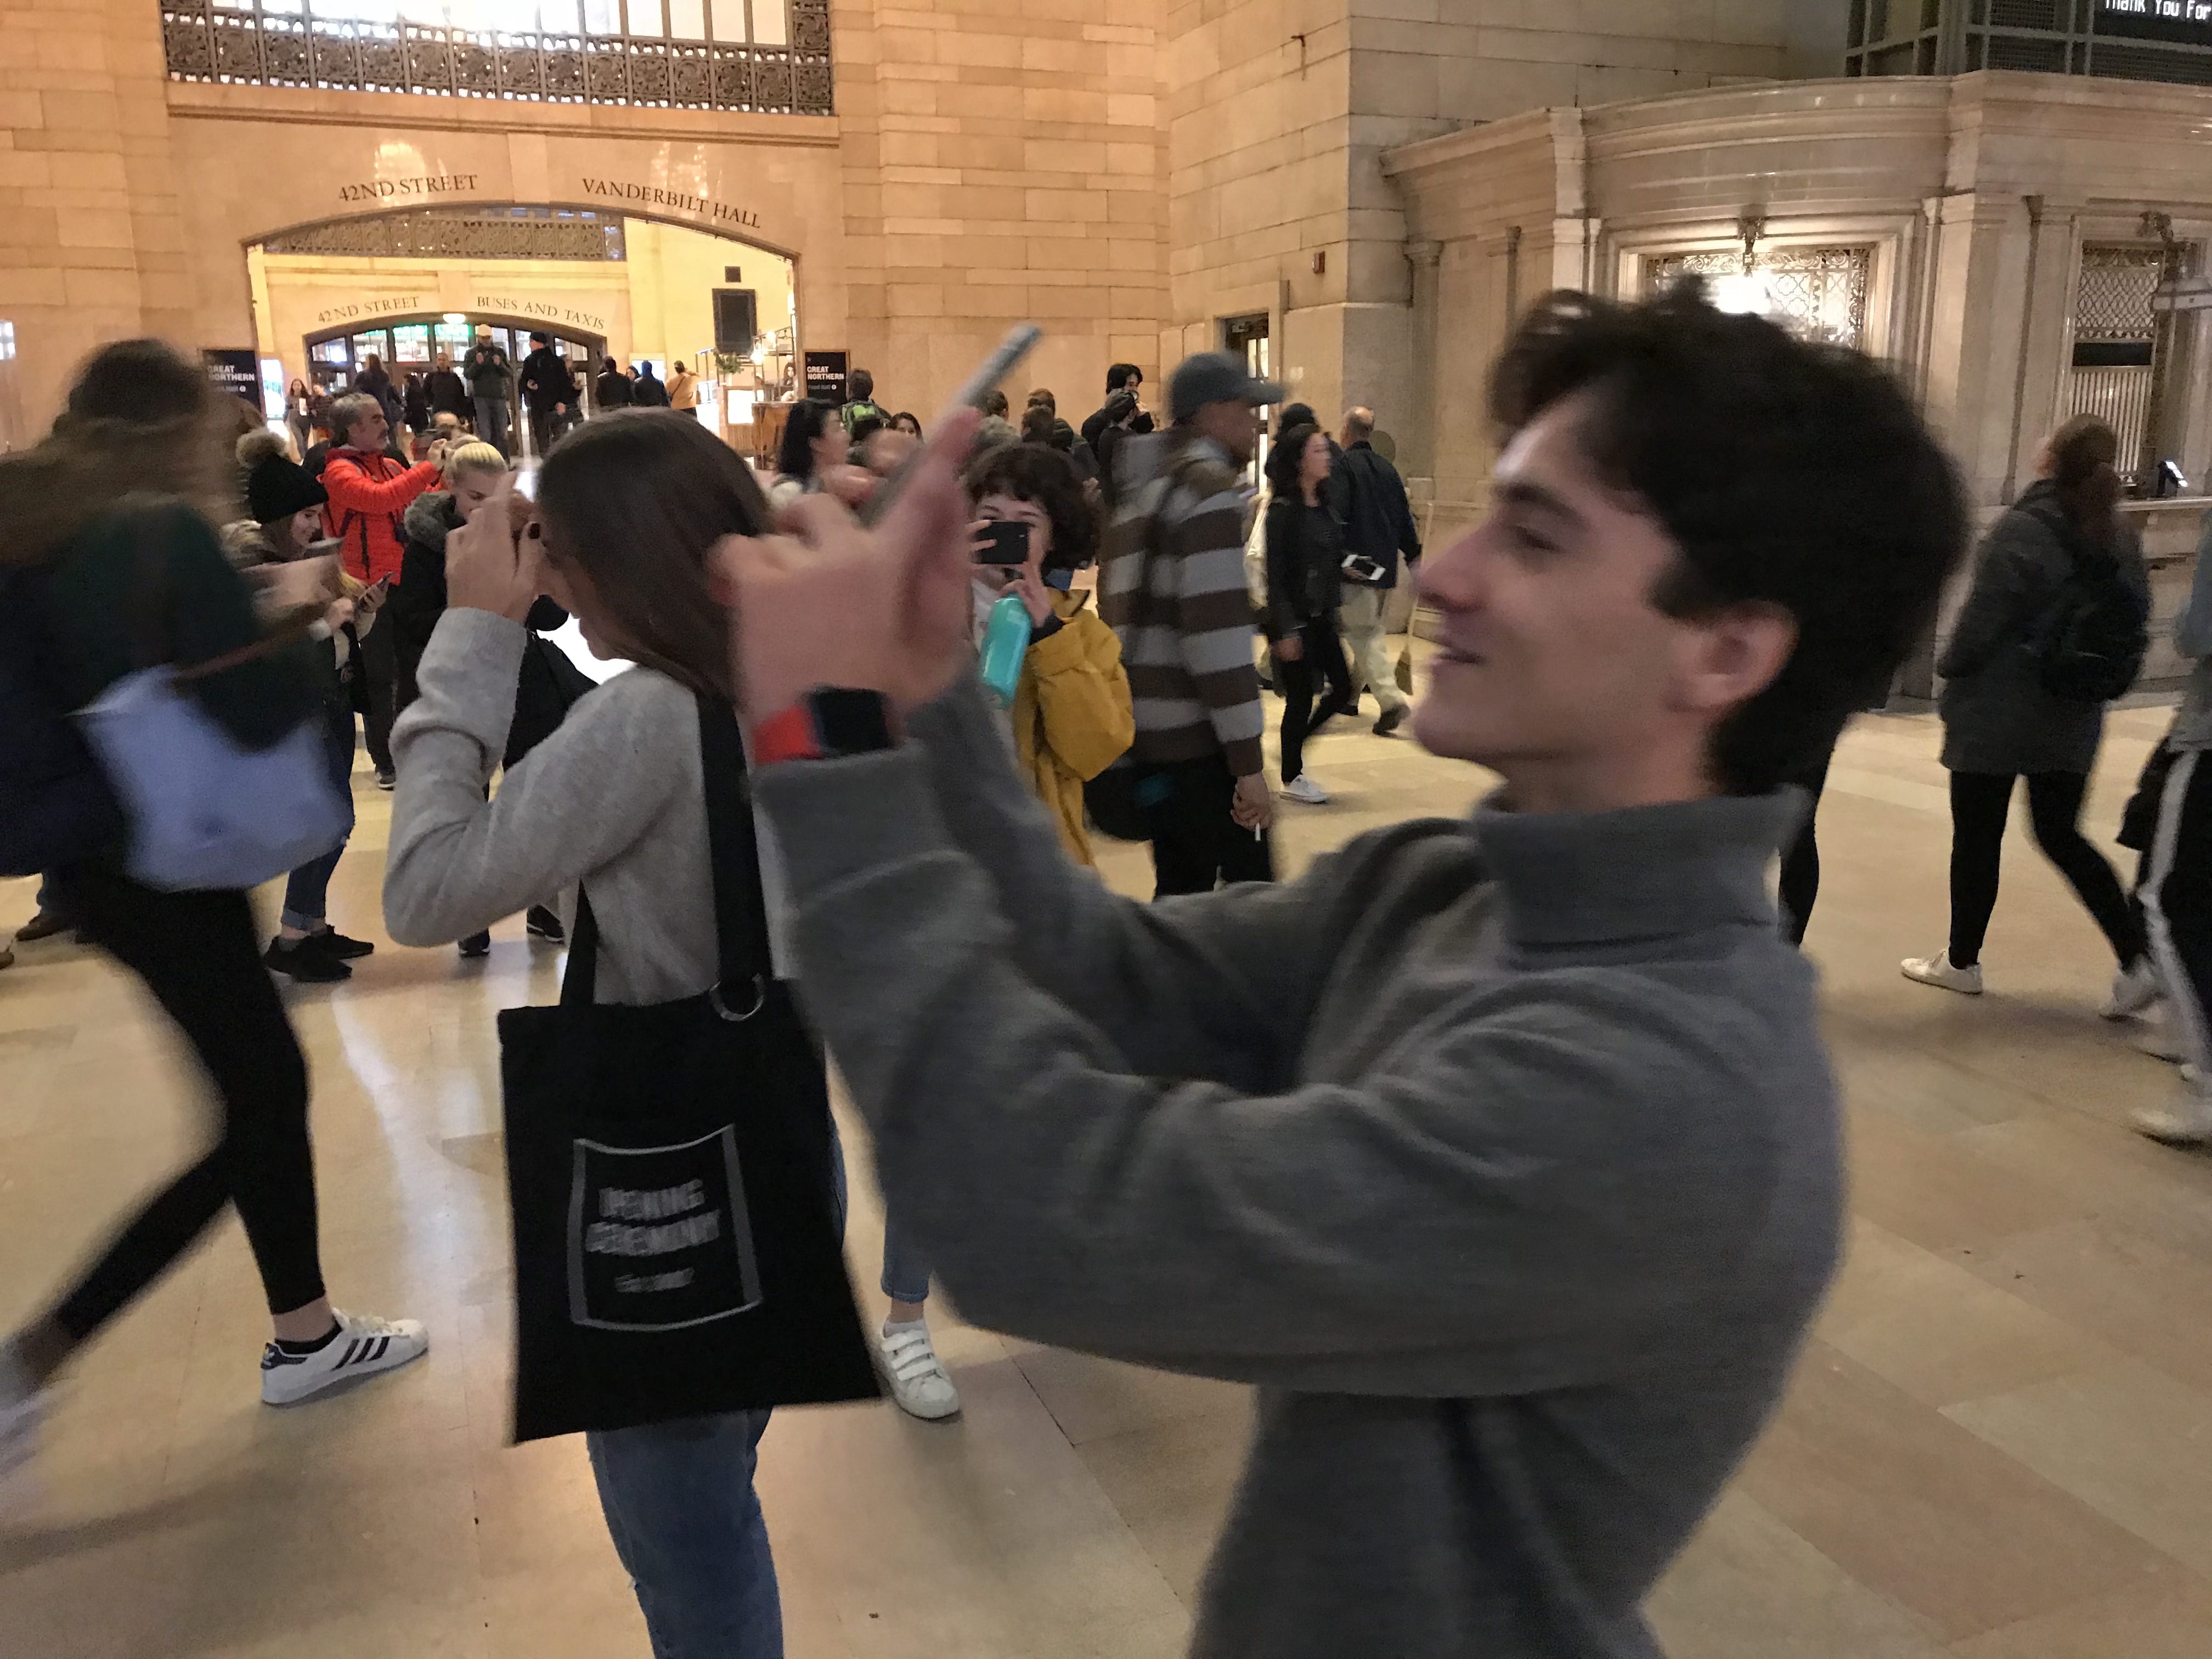 Grand Central Observations